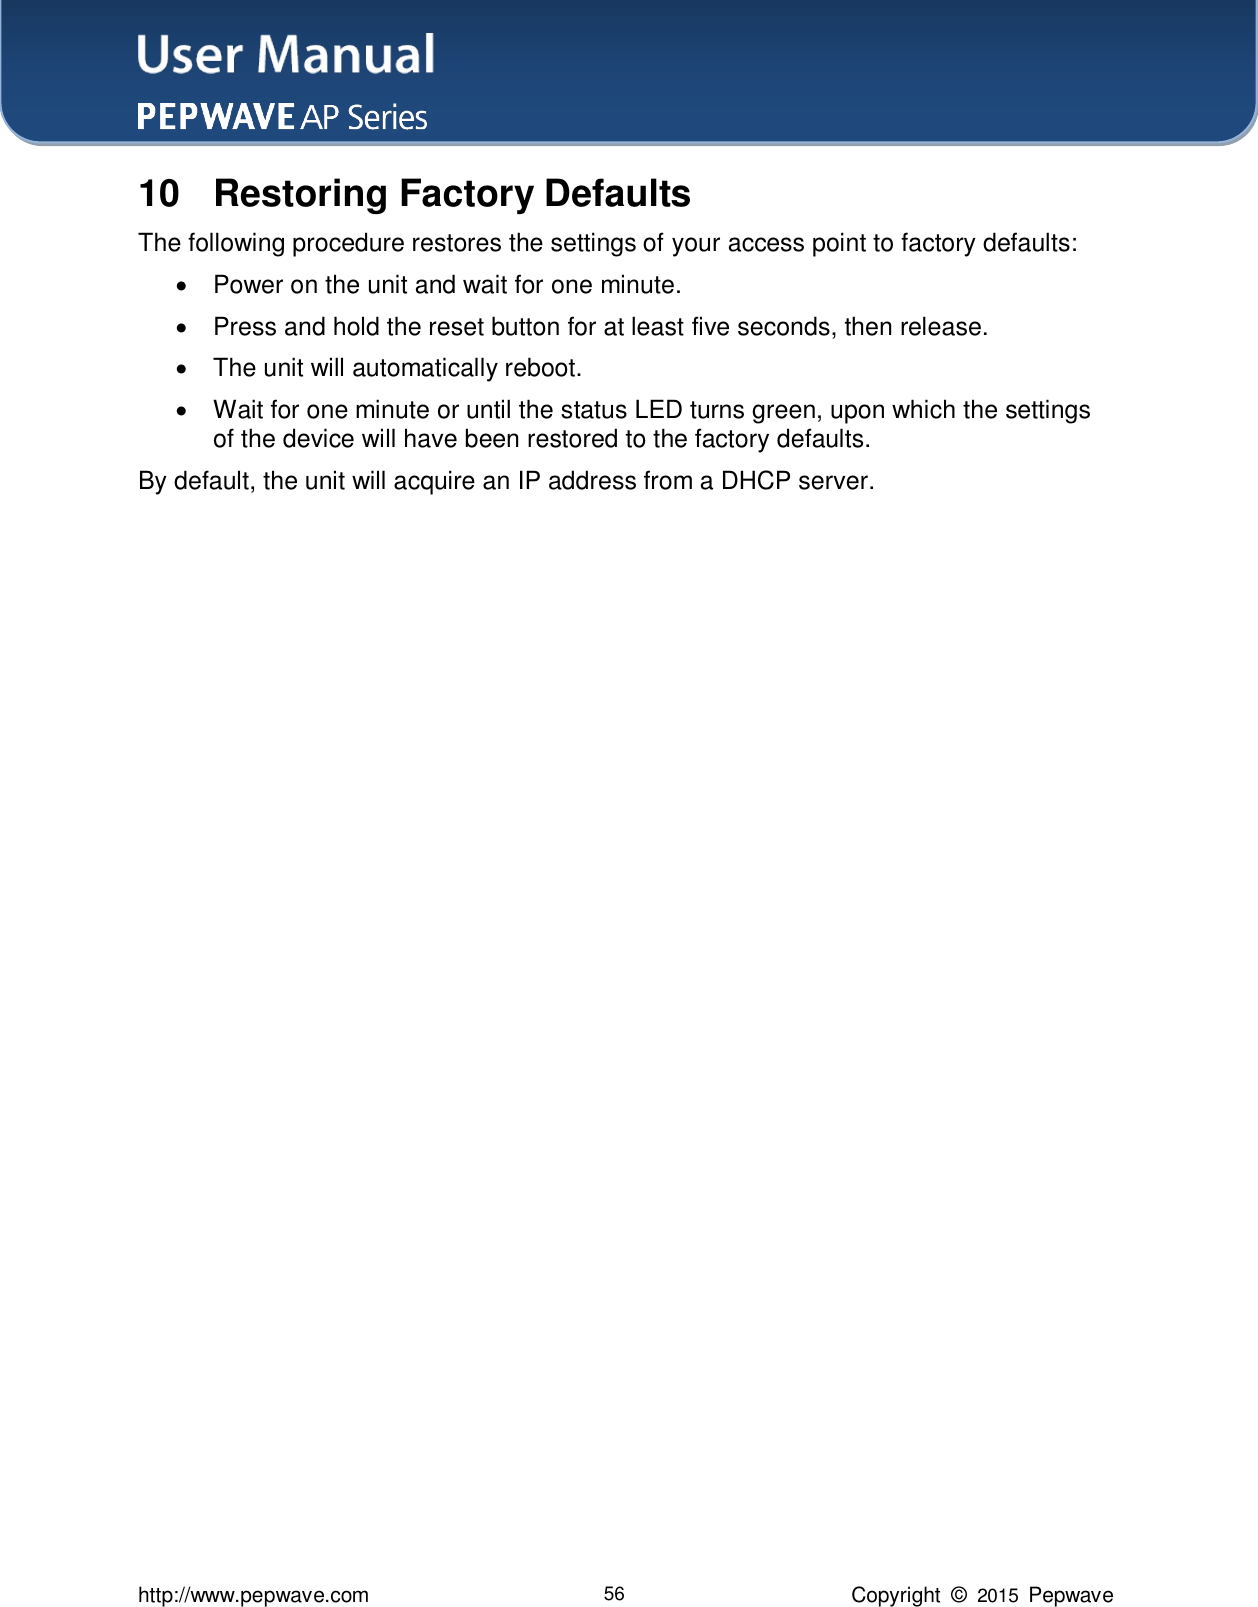 User Manual    http://www.pepwave.com 56 Copyright  ©  2015  Pepwave 10  Restoring Factory Defaults The following procedure restores the settings of your access point to factory defaults:   Power on the unit and wait for one minute.   Press and hold the reset button for at least five seconds, then release.   The unit will automatically reboot.   Wait for one minute or until the status LED turns green, upon which the settings of the device will have been restored to the factory defaults.     By default, the unit will acquire an IP address from a DHCP server.      